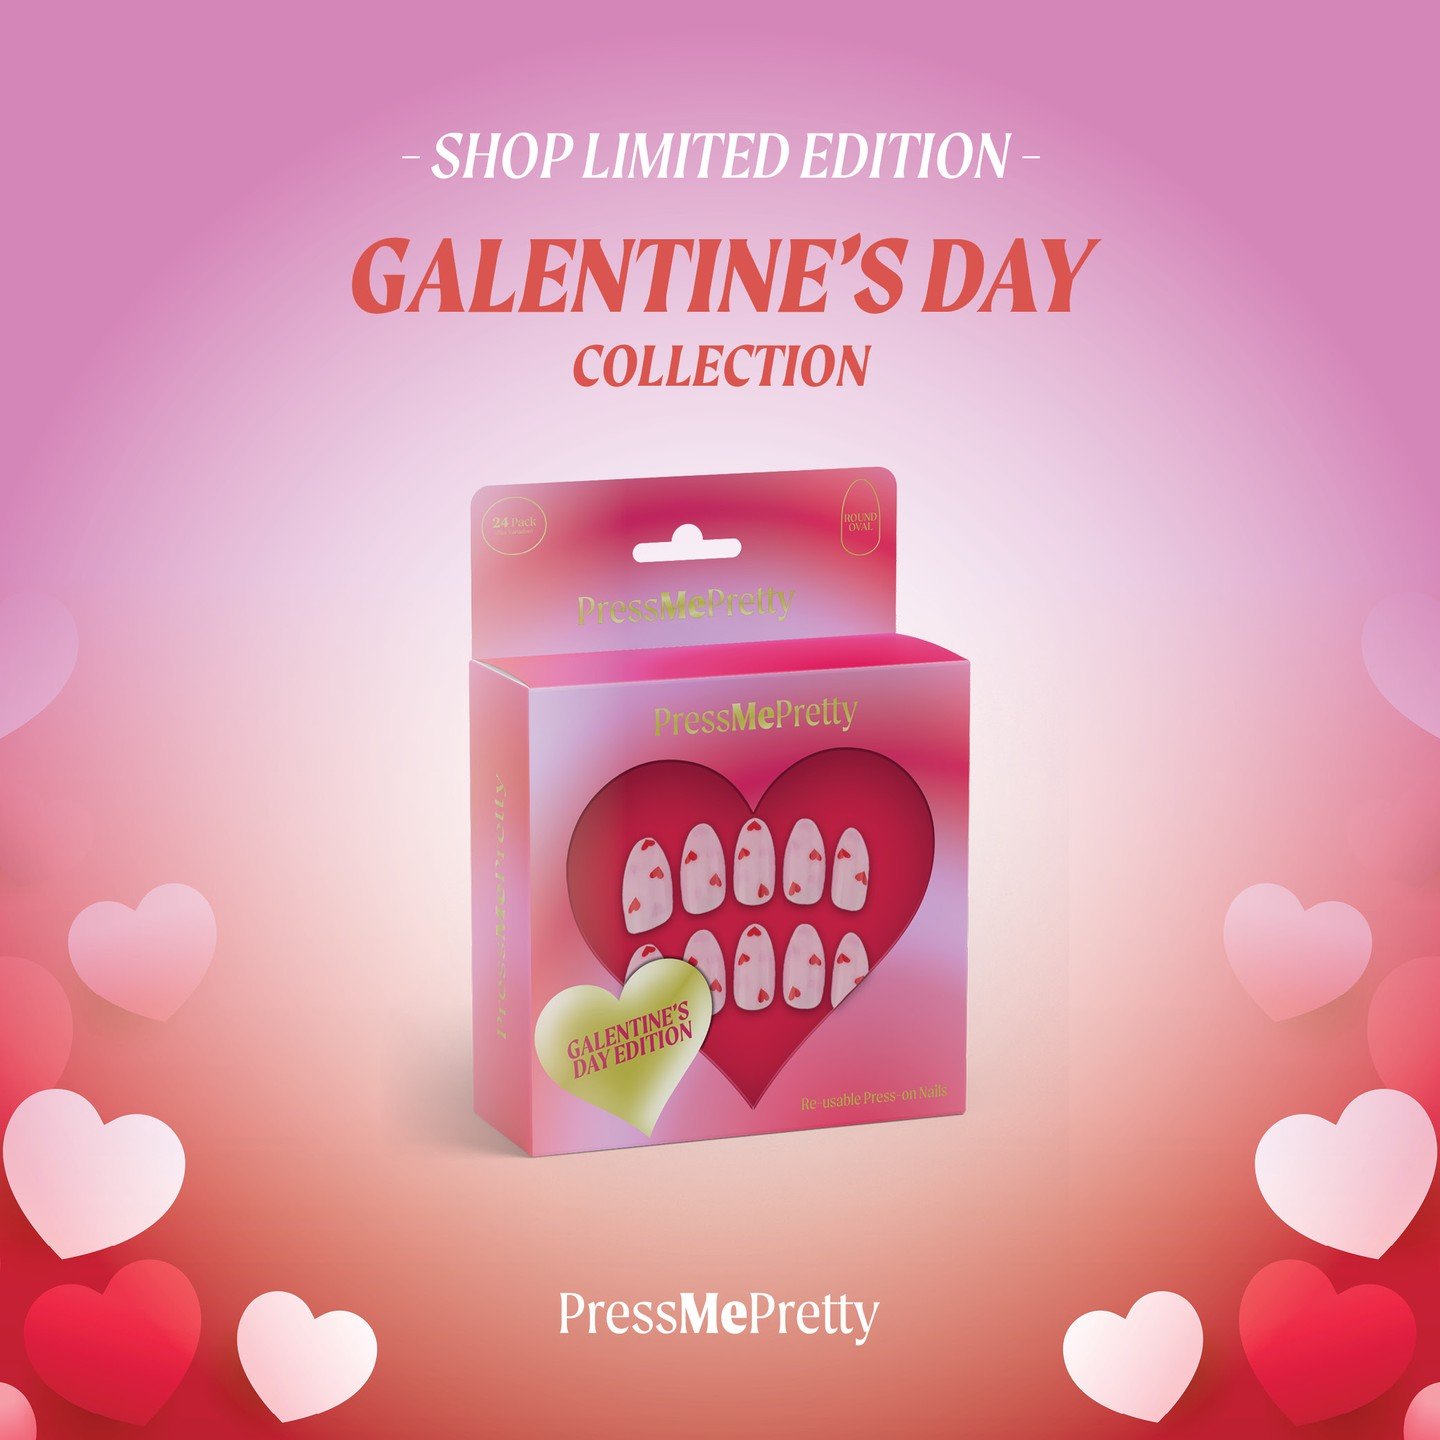 Happy Galentine's!

My entry for @thebriefdiary @creatsyofficial latest brief.

#tbdpressmepretty #thebriefdiary #creatsy #creatsyofficial #tbdpressmepretty

Press on nail pattern sourced from sephora.com